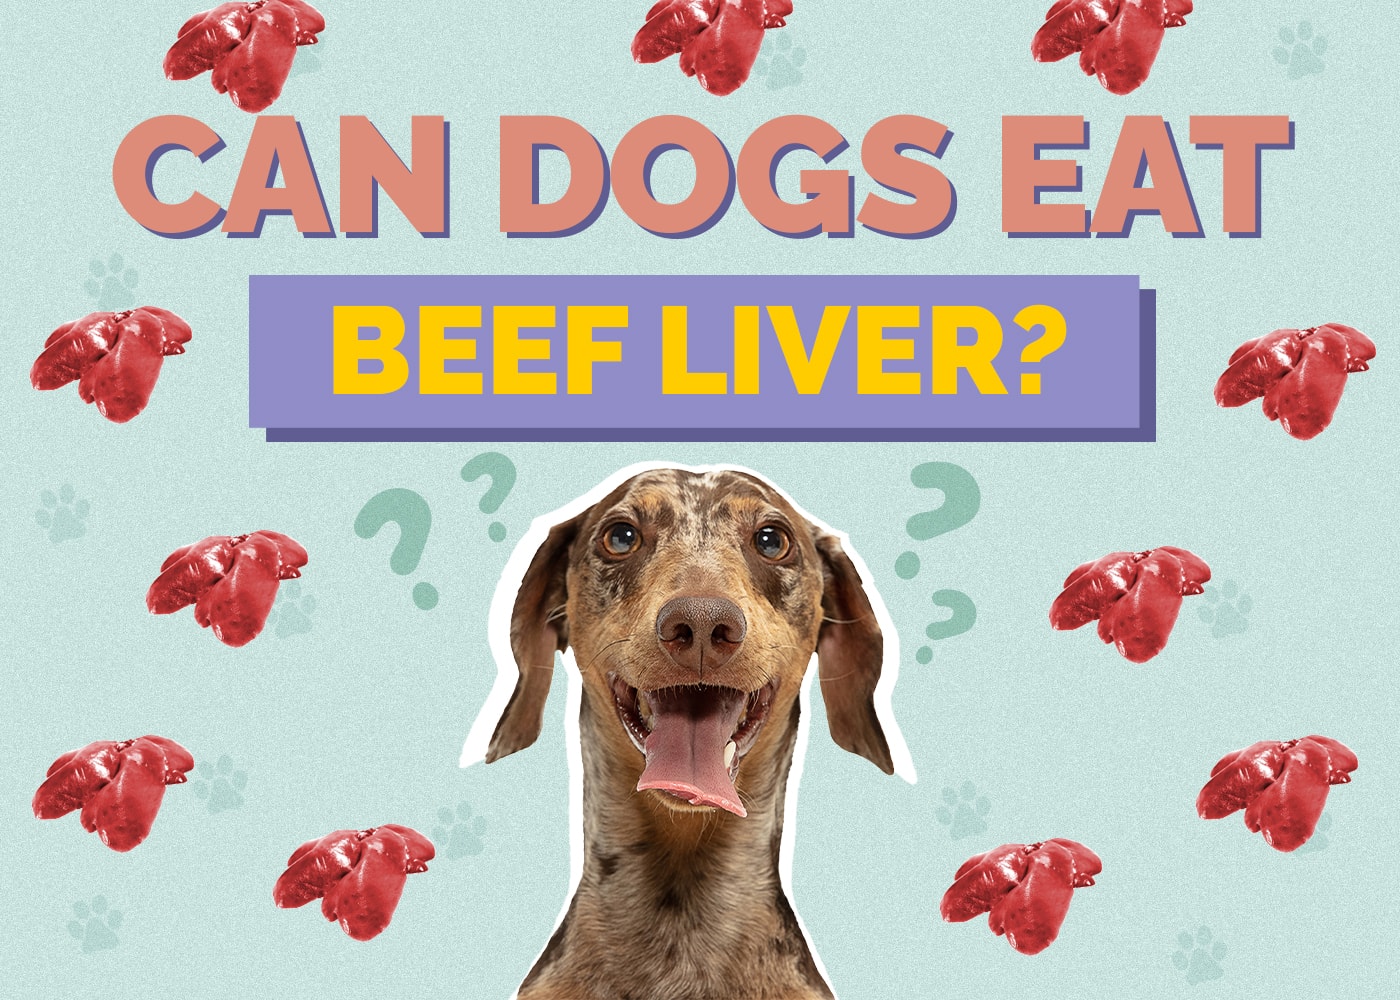 Can Dogs Eat Beef Liver